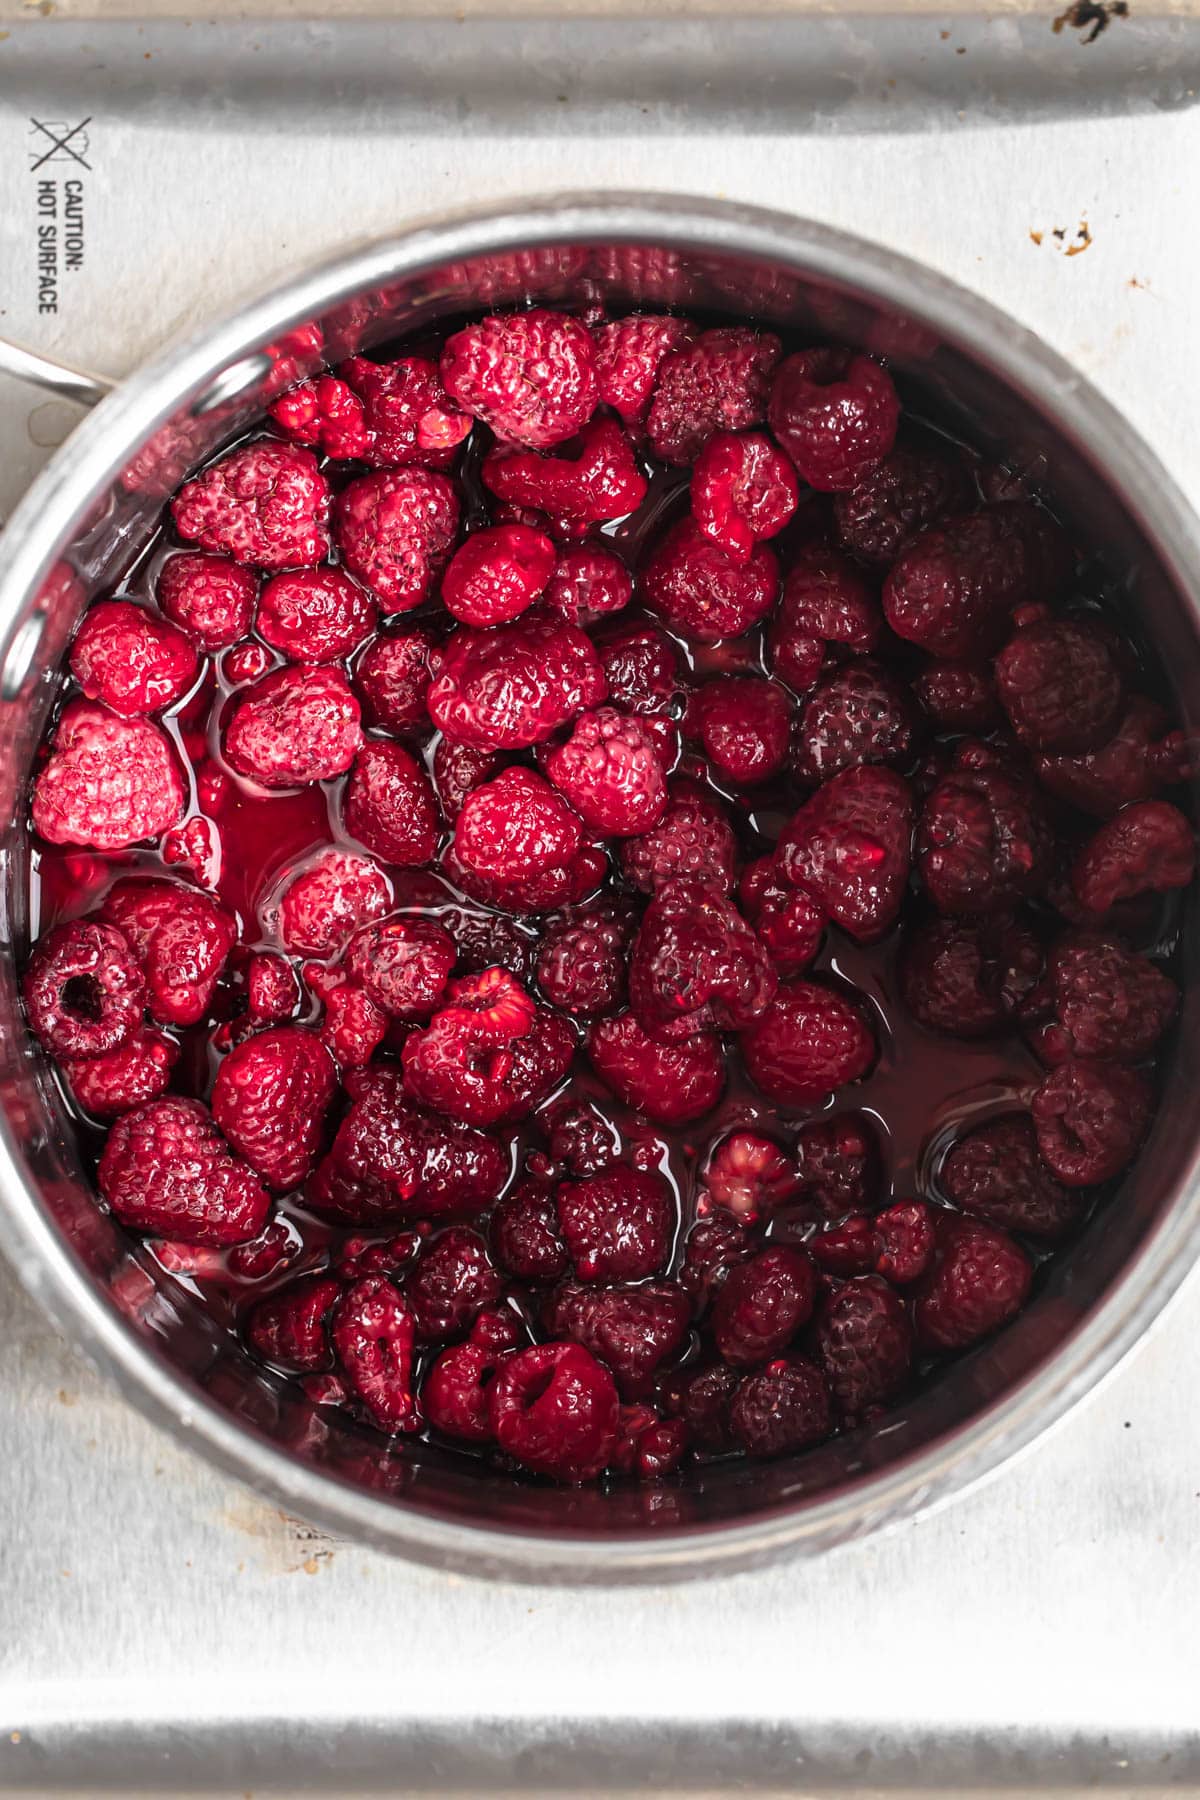 Ingredients for raspberry compote added to a saucepan.